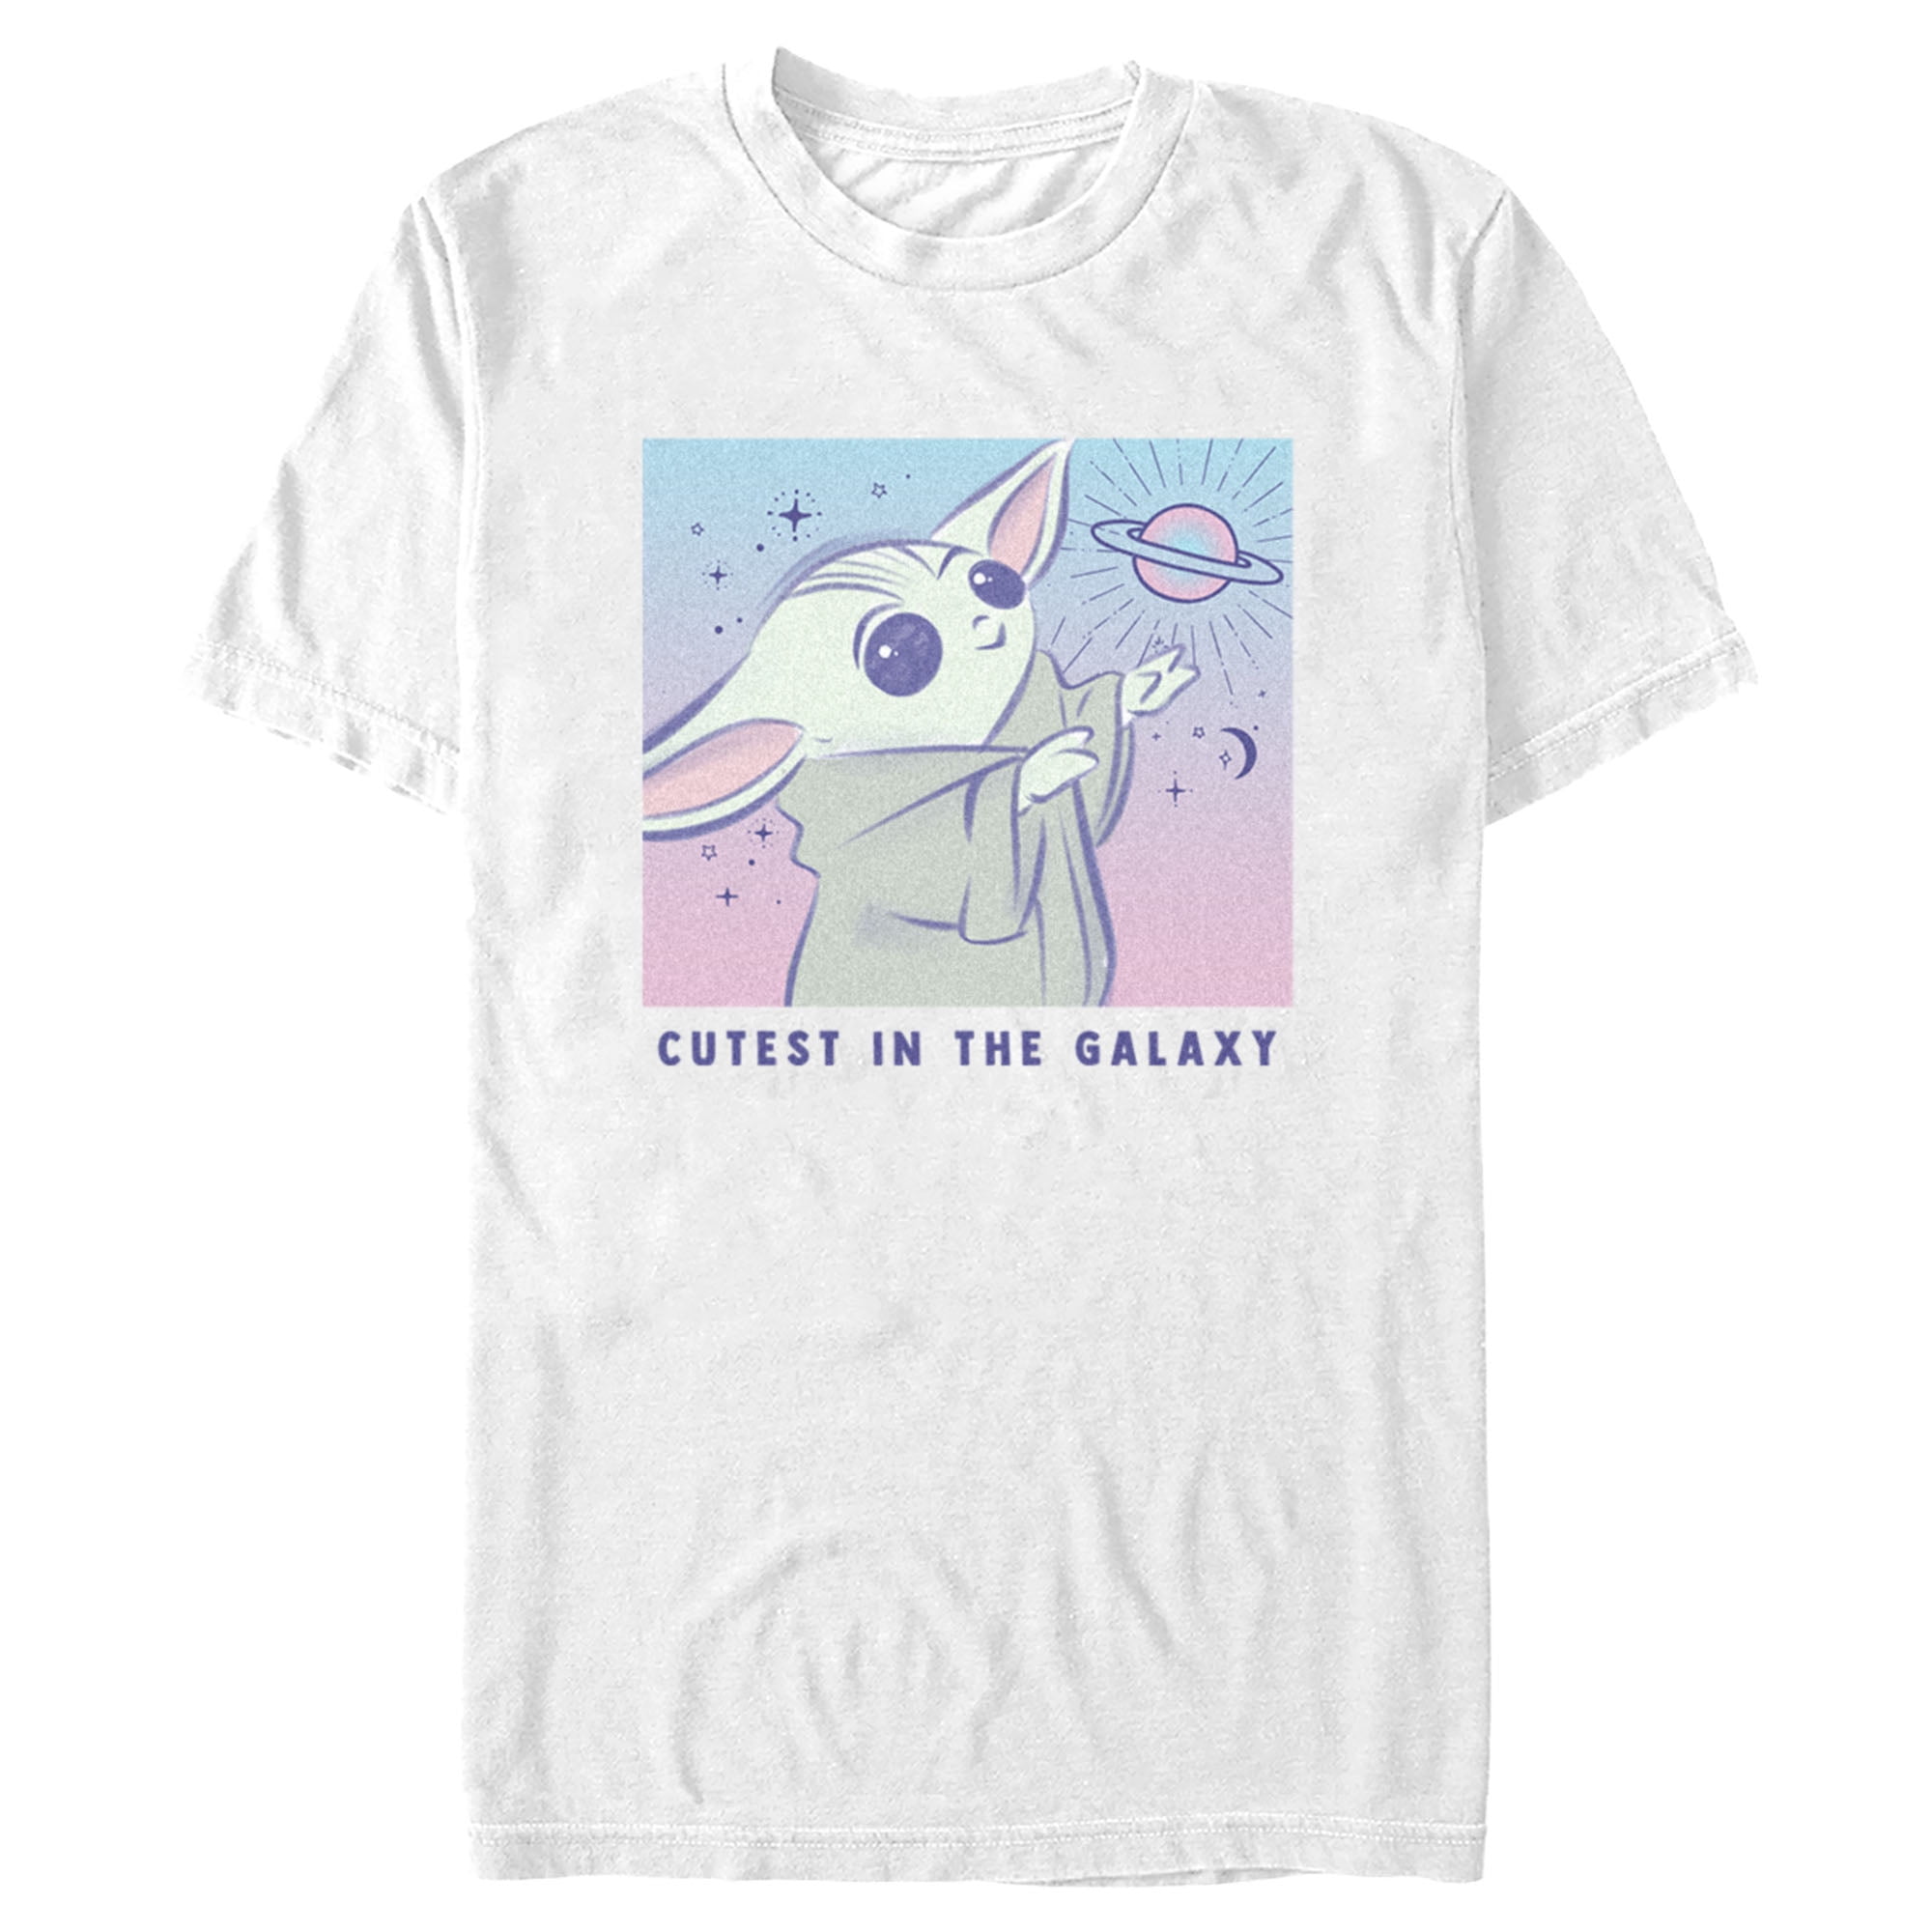 Men's Star Wars: The Mandalorian Grogu Cutest in the Galaxy Celestial Sketch  Graphic Tee White Small 